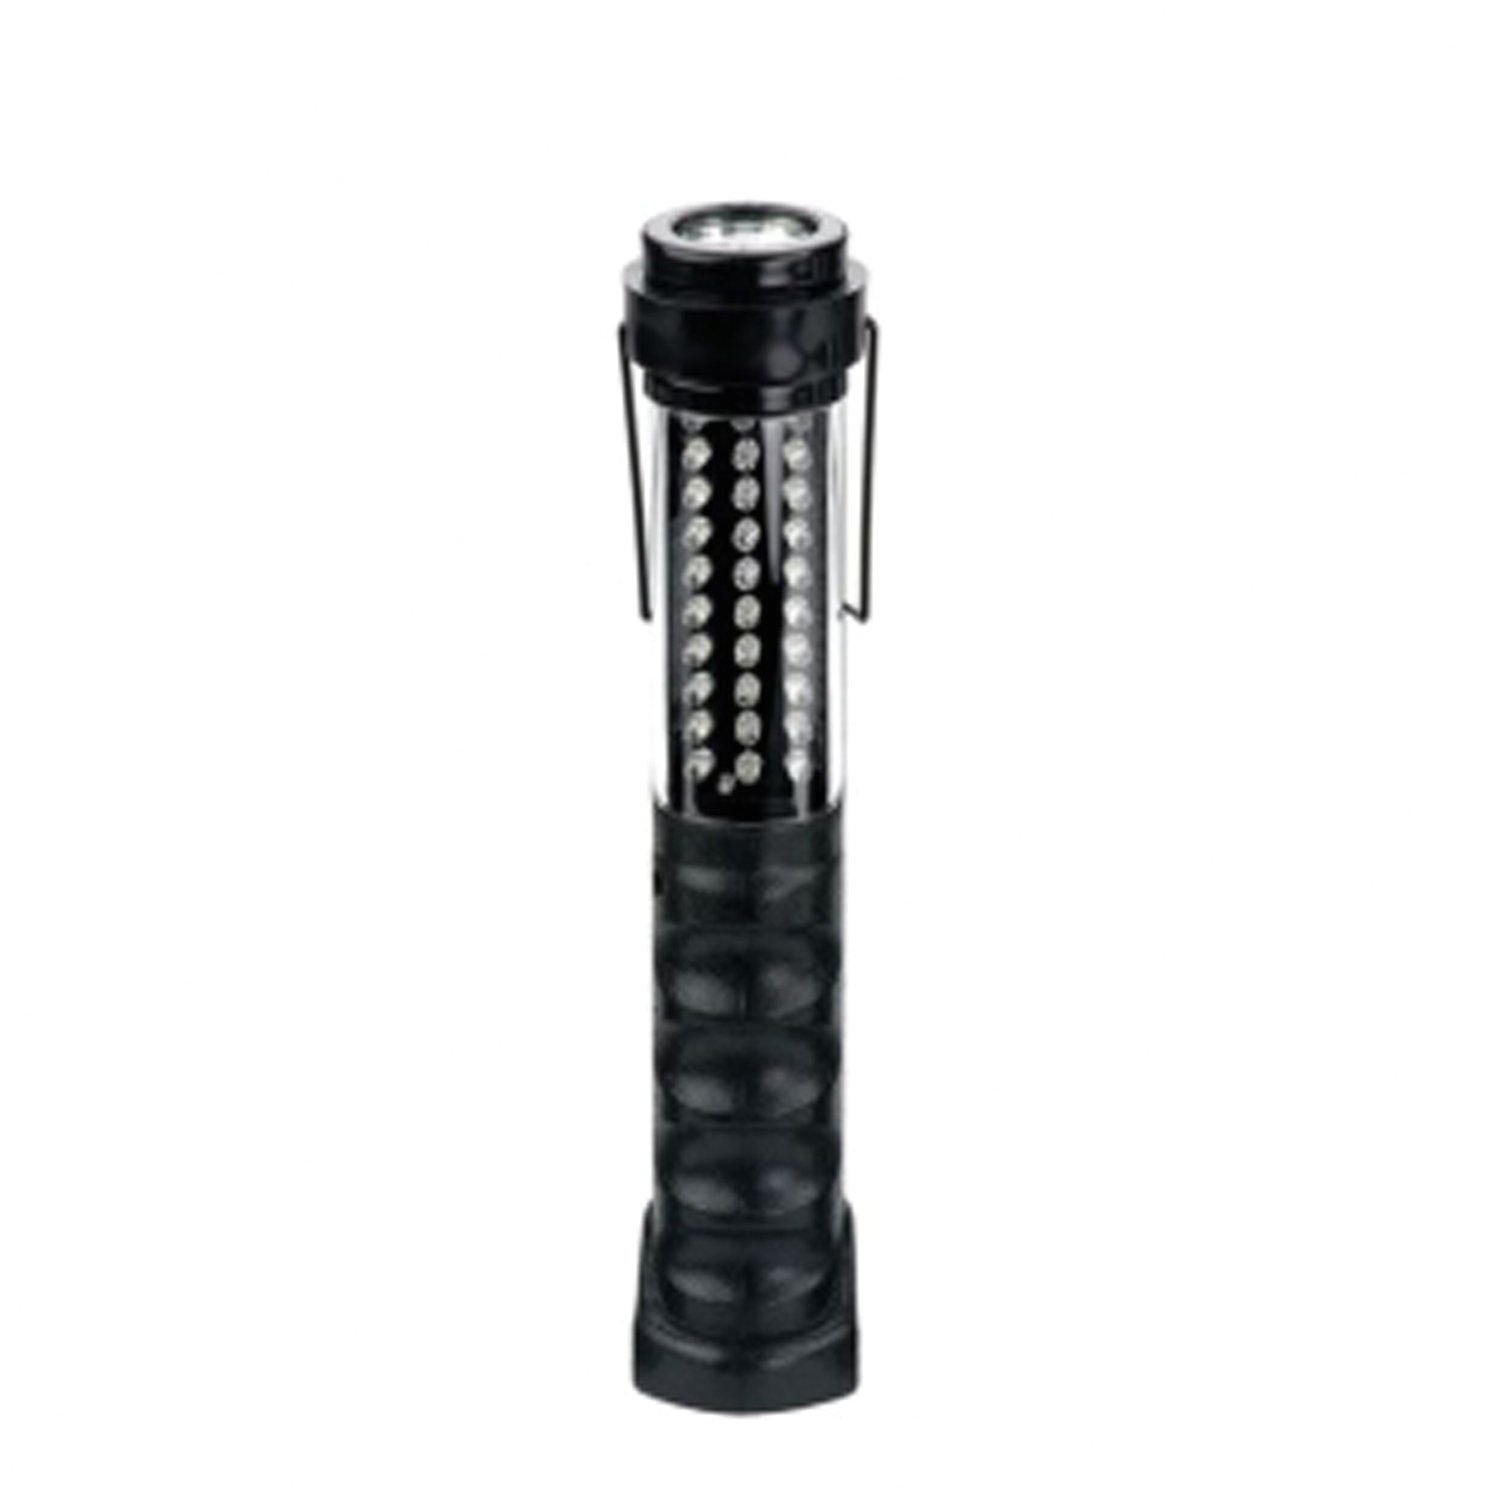 bayco night stick worklight and flashlight dual mode multi function small size light weight bright leds hour life impact and chemical resistant